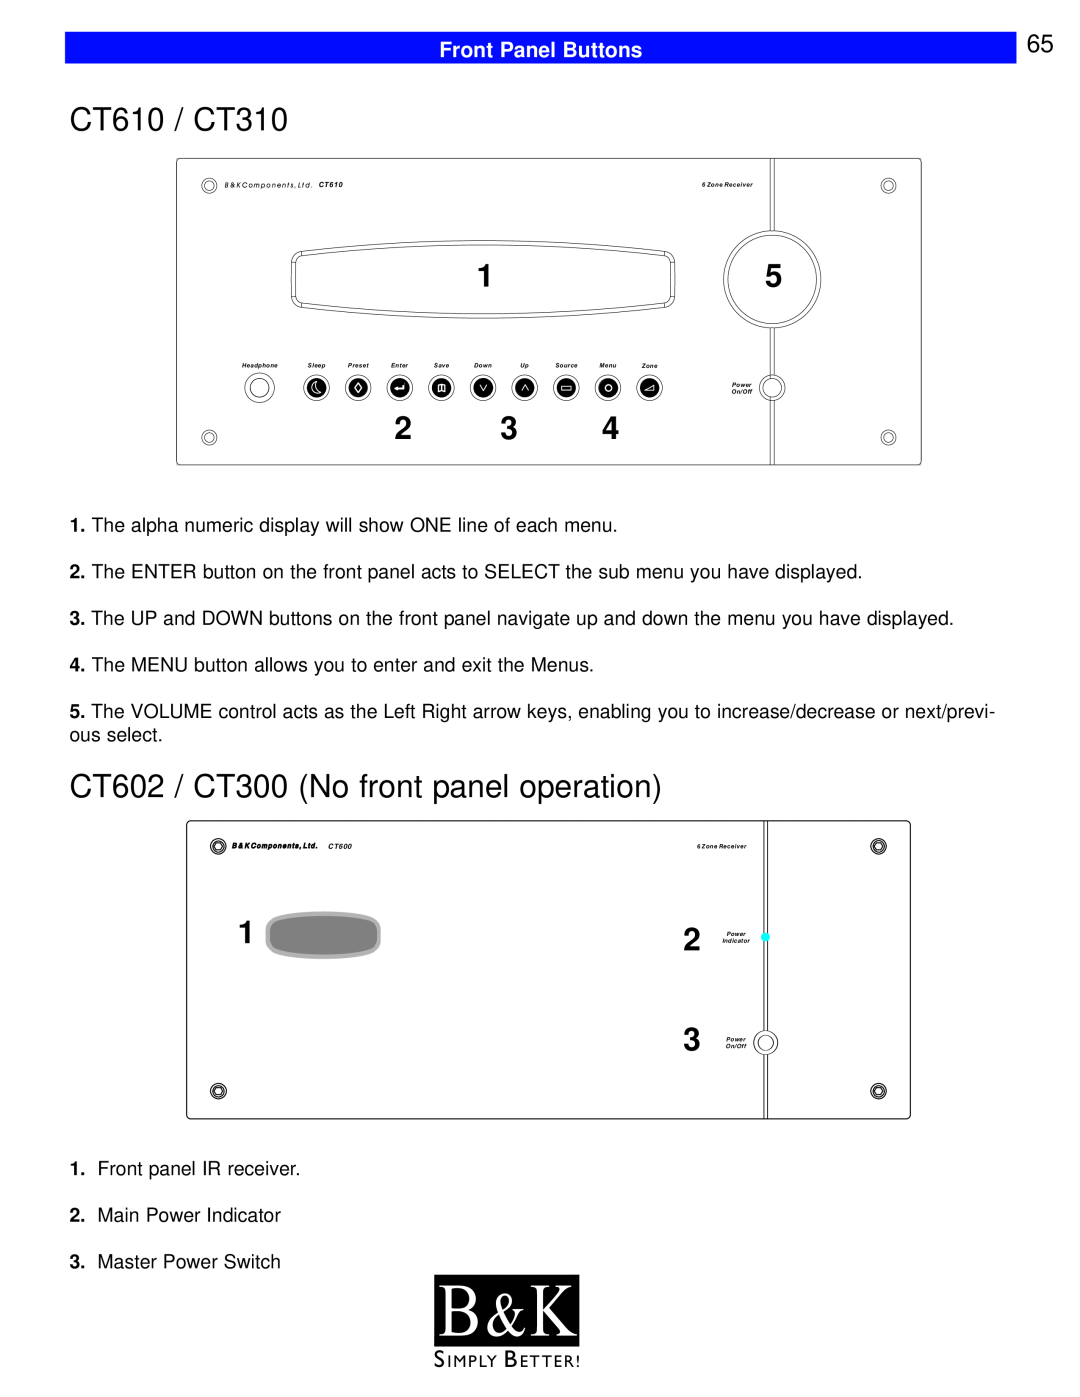 B&K CT600 user manual CT610 / CT310, CT602 / CT300 No front panel operation, B & K, Front Panel Buttons 